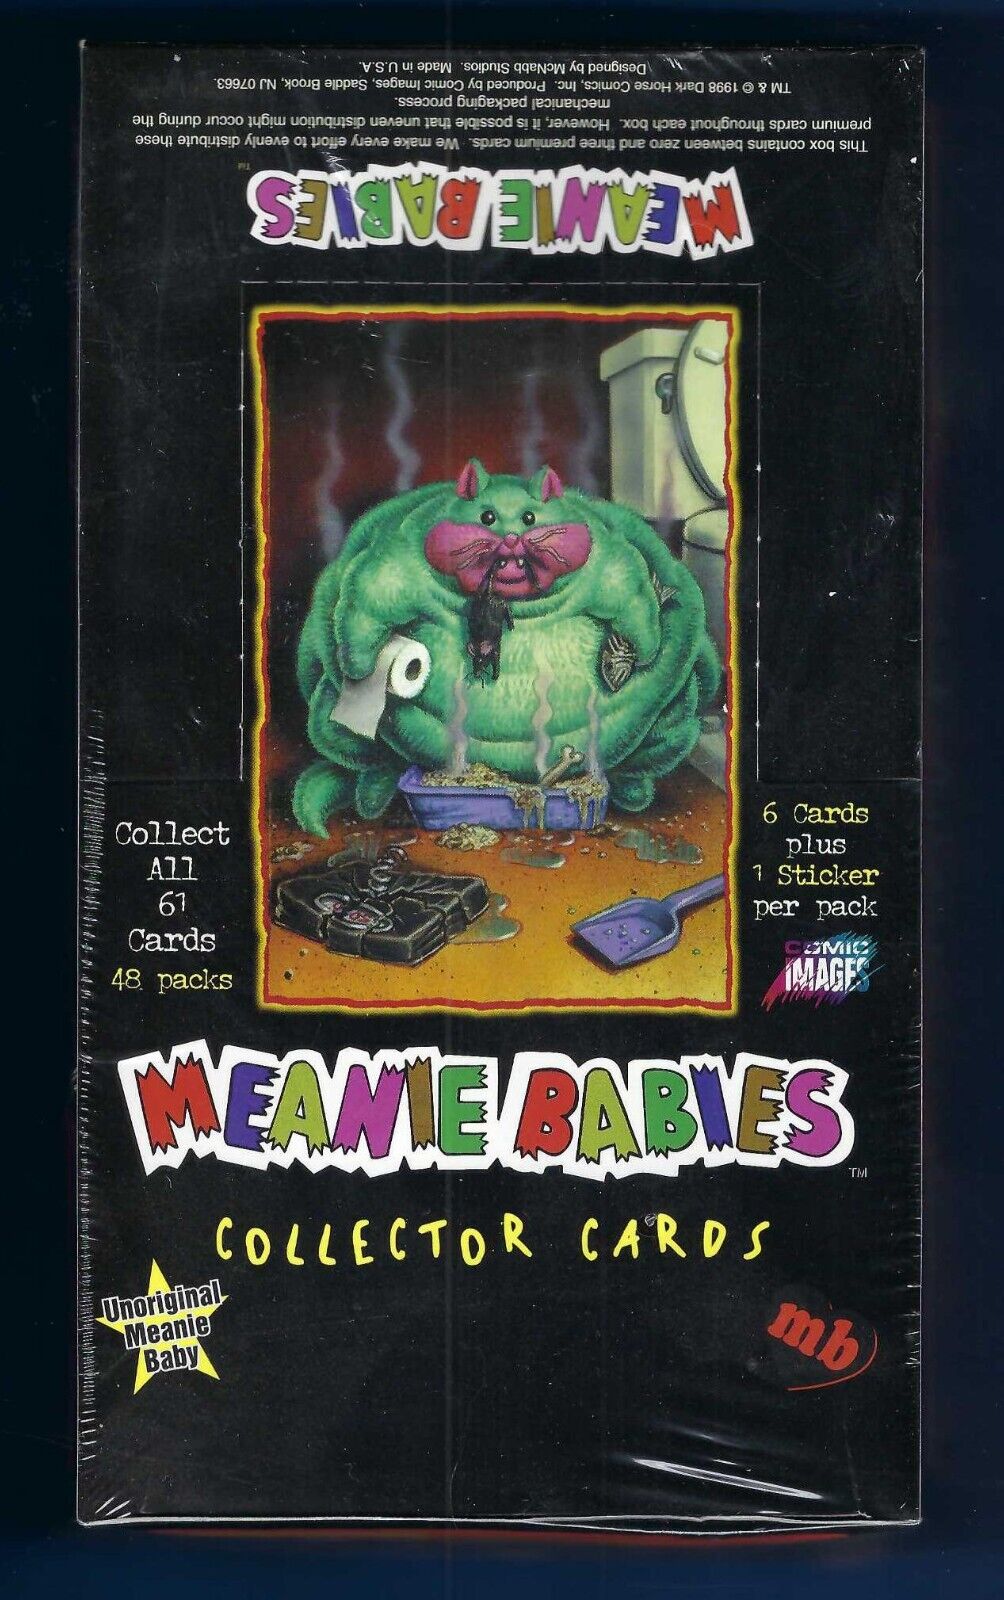 MEANIE BABIES COLLECTOR CARDS FACTORY SEALED BOX 48 PACKS 1998 BEANIES MEET GPK